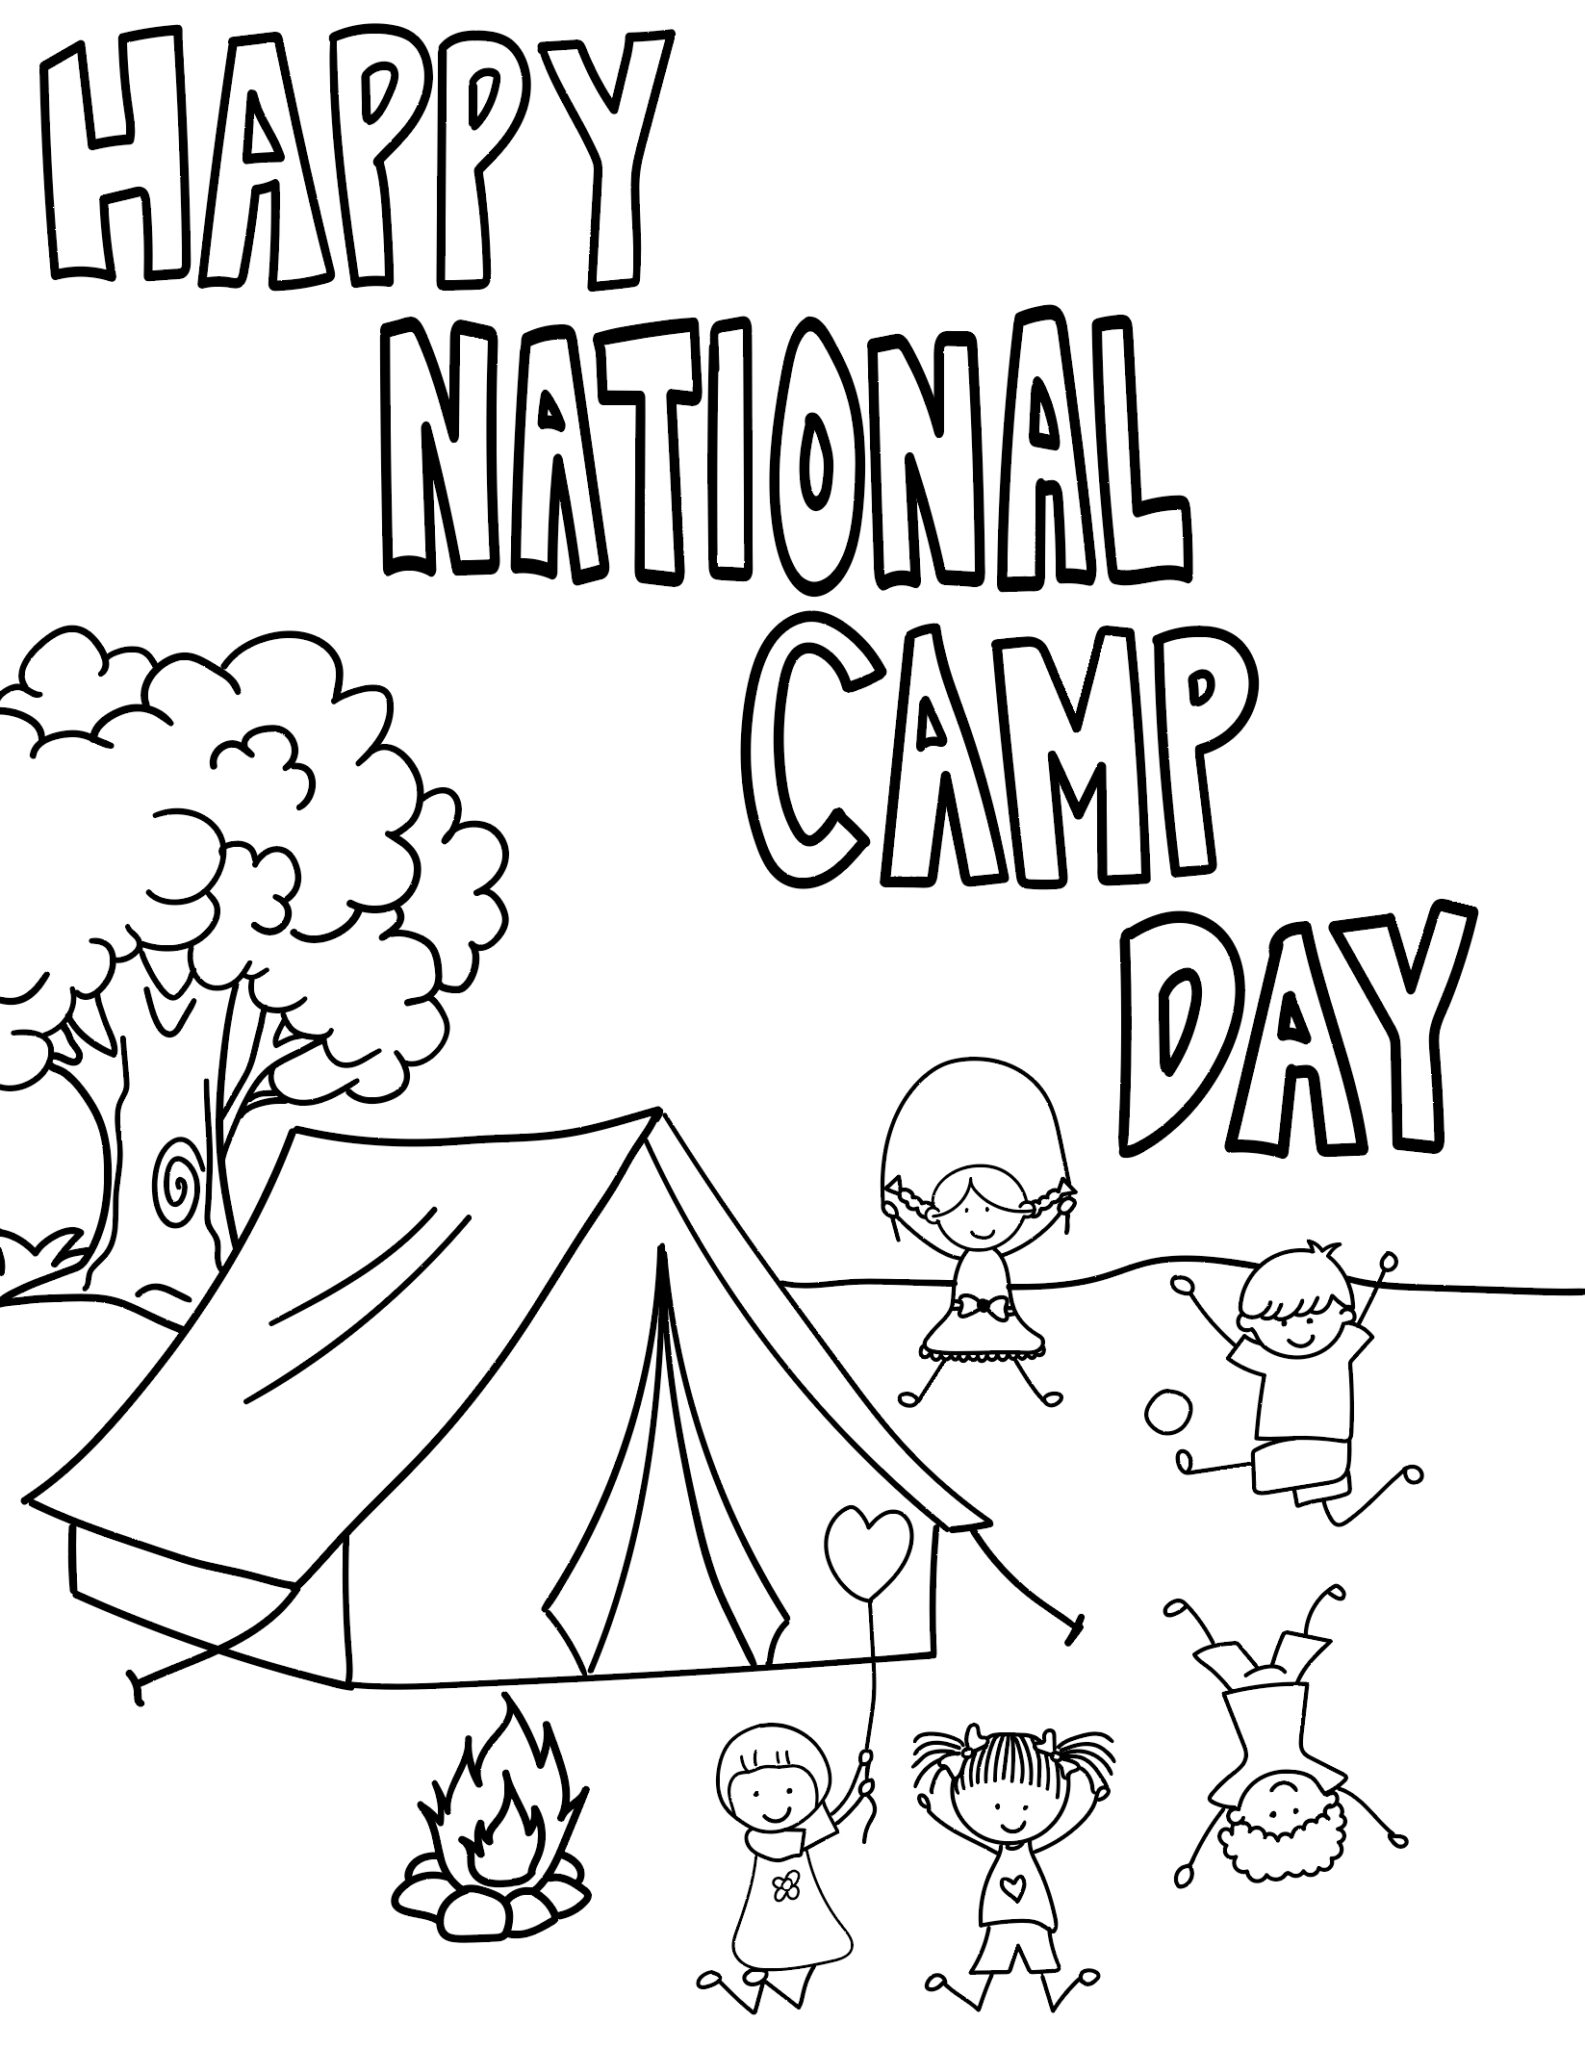 National Camp Day Art Sphere Inc.